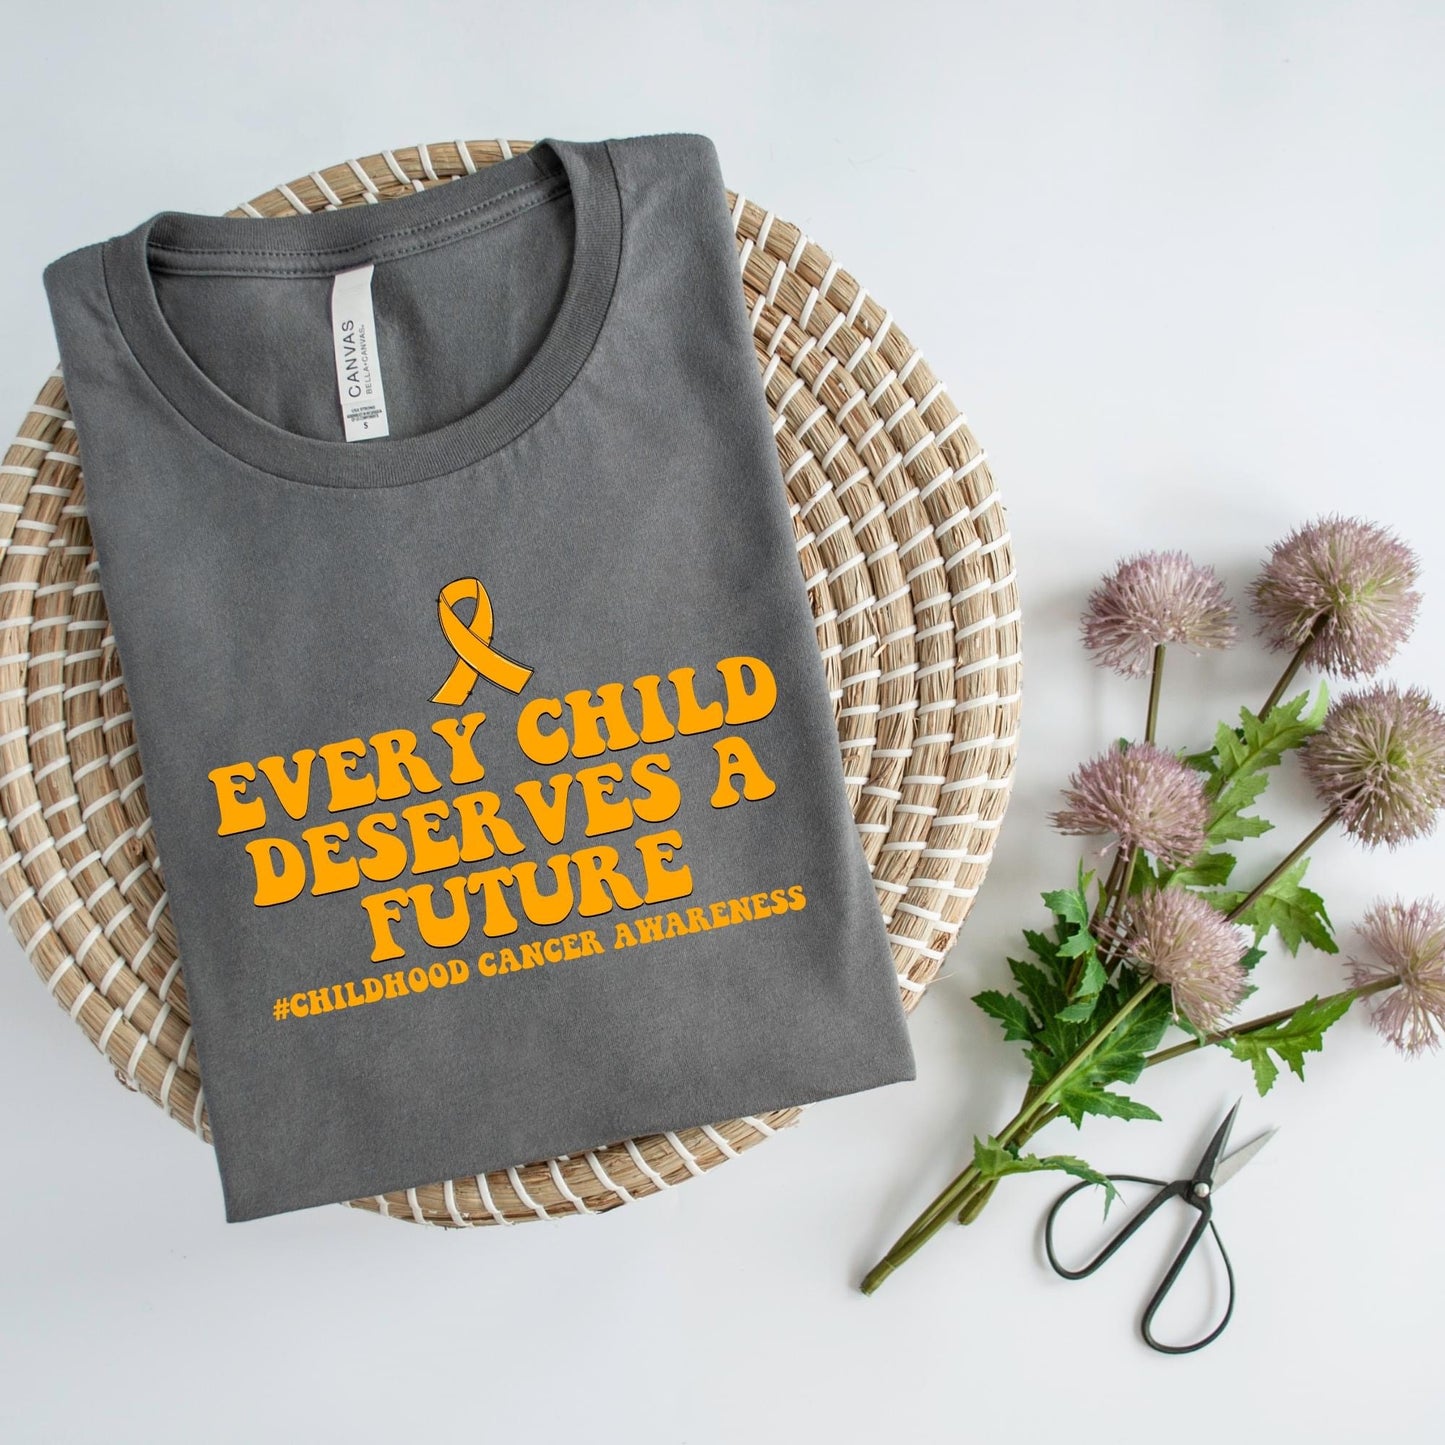 Every Child Deserves a Future *Ollie & Co.Exclusive*